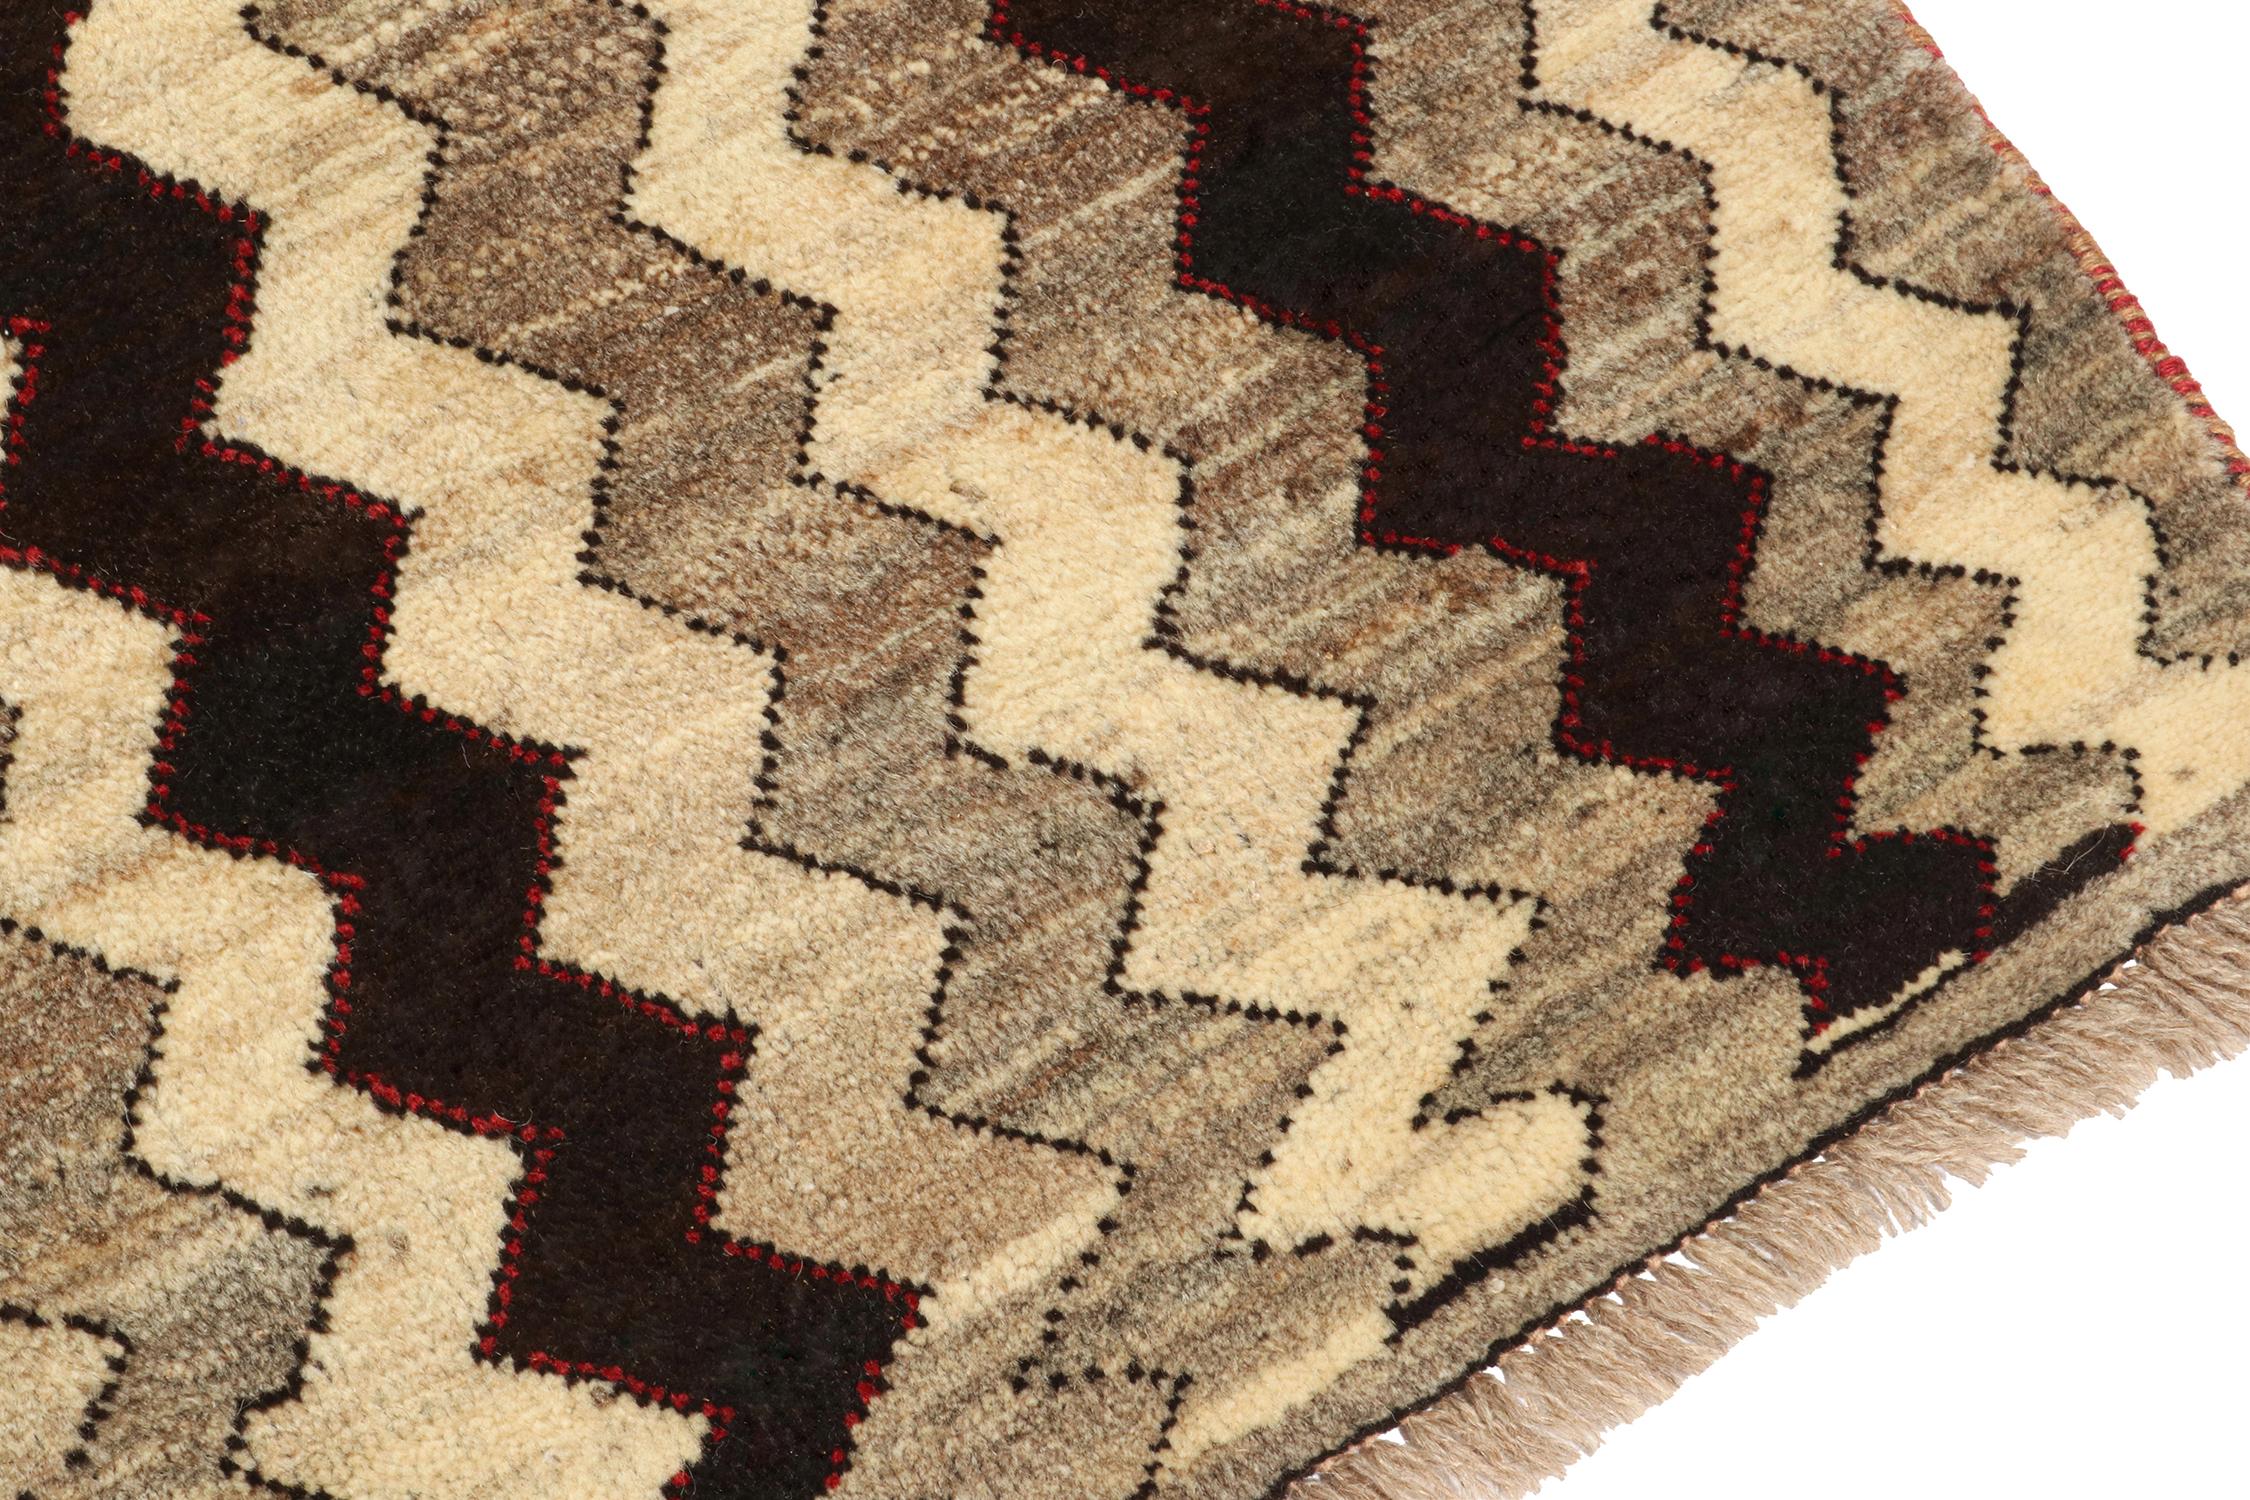 Vintage Gabbeh Tribal Rug in Beige-Brown & Black Chevron Patterns by Rug & Kilim In Good Condition For Sale In Long Island City, NY